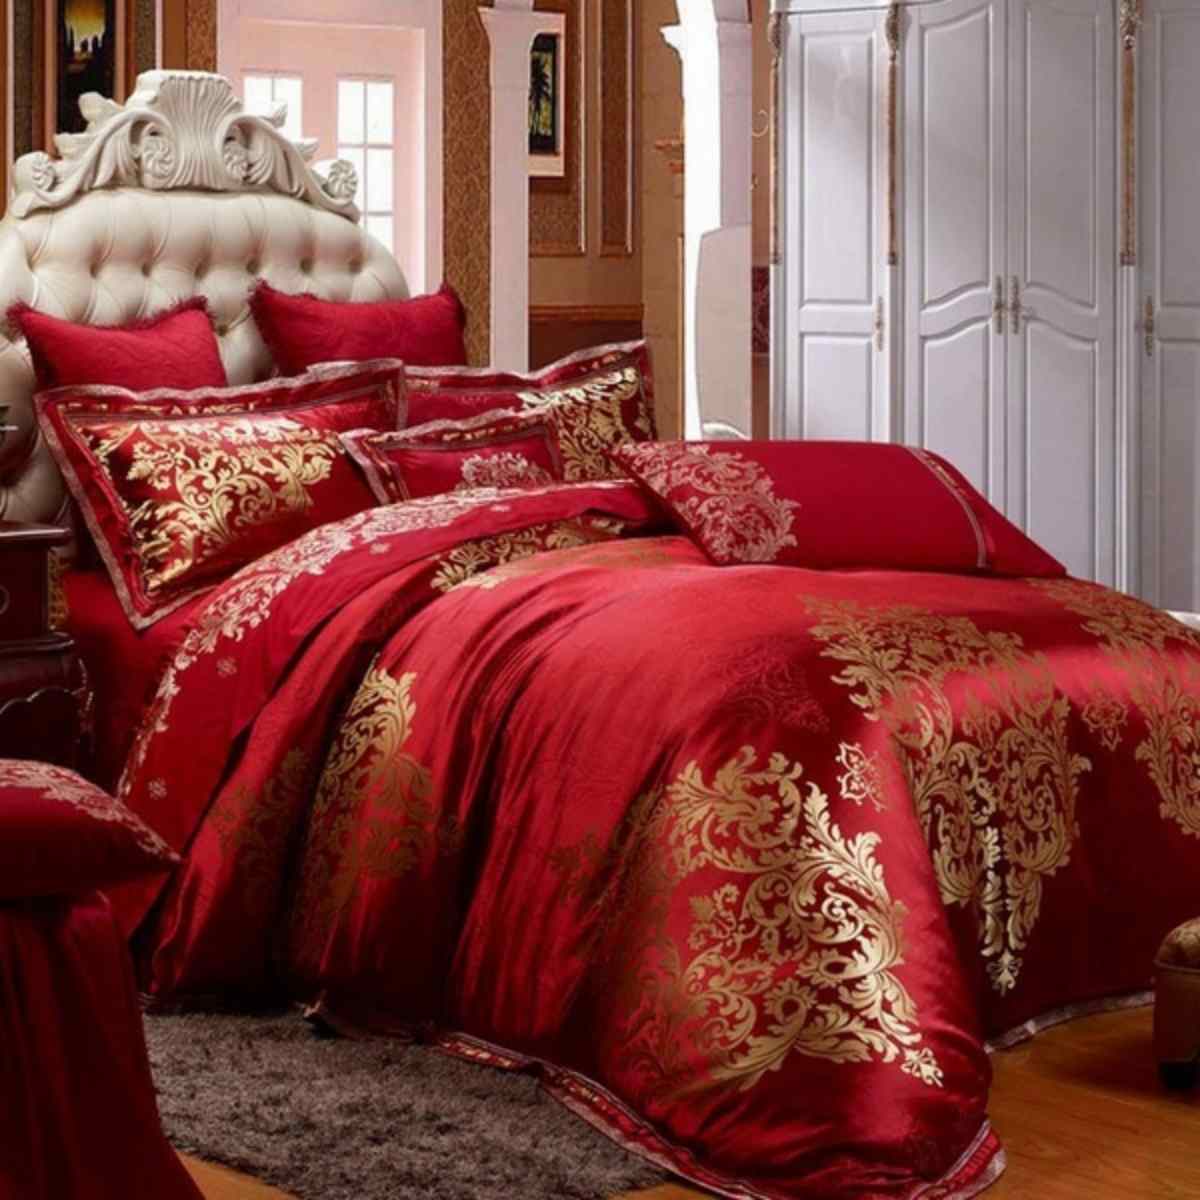 Duvet Covers Luxury Bedding Sets For A Glamorous Look In The Bedroom